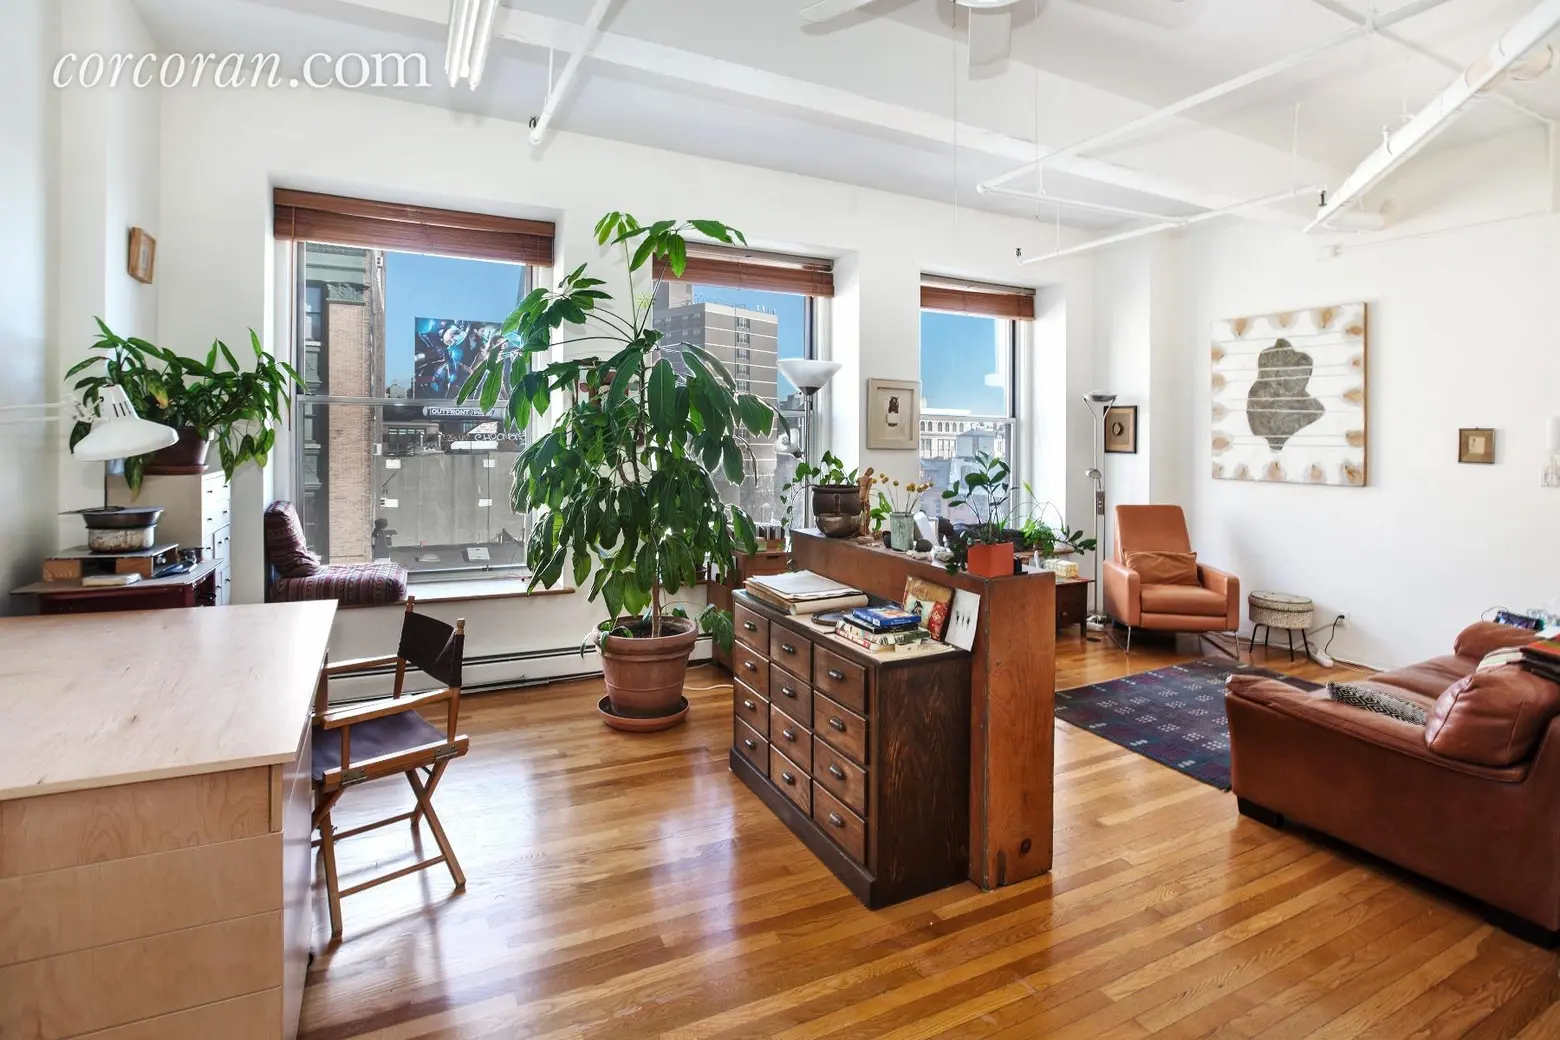 Floor-Through Noho Loft With Four Exposures Hits the Market for $3.25 Million